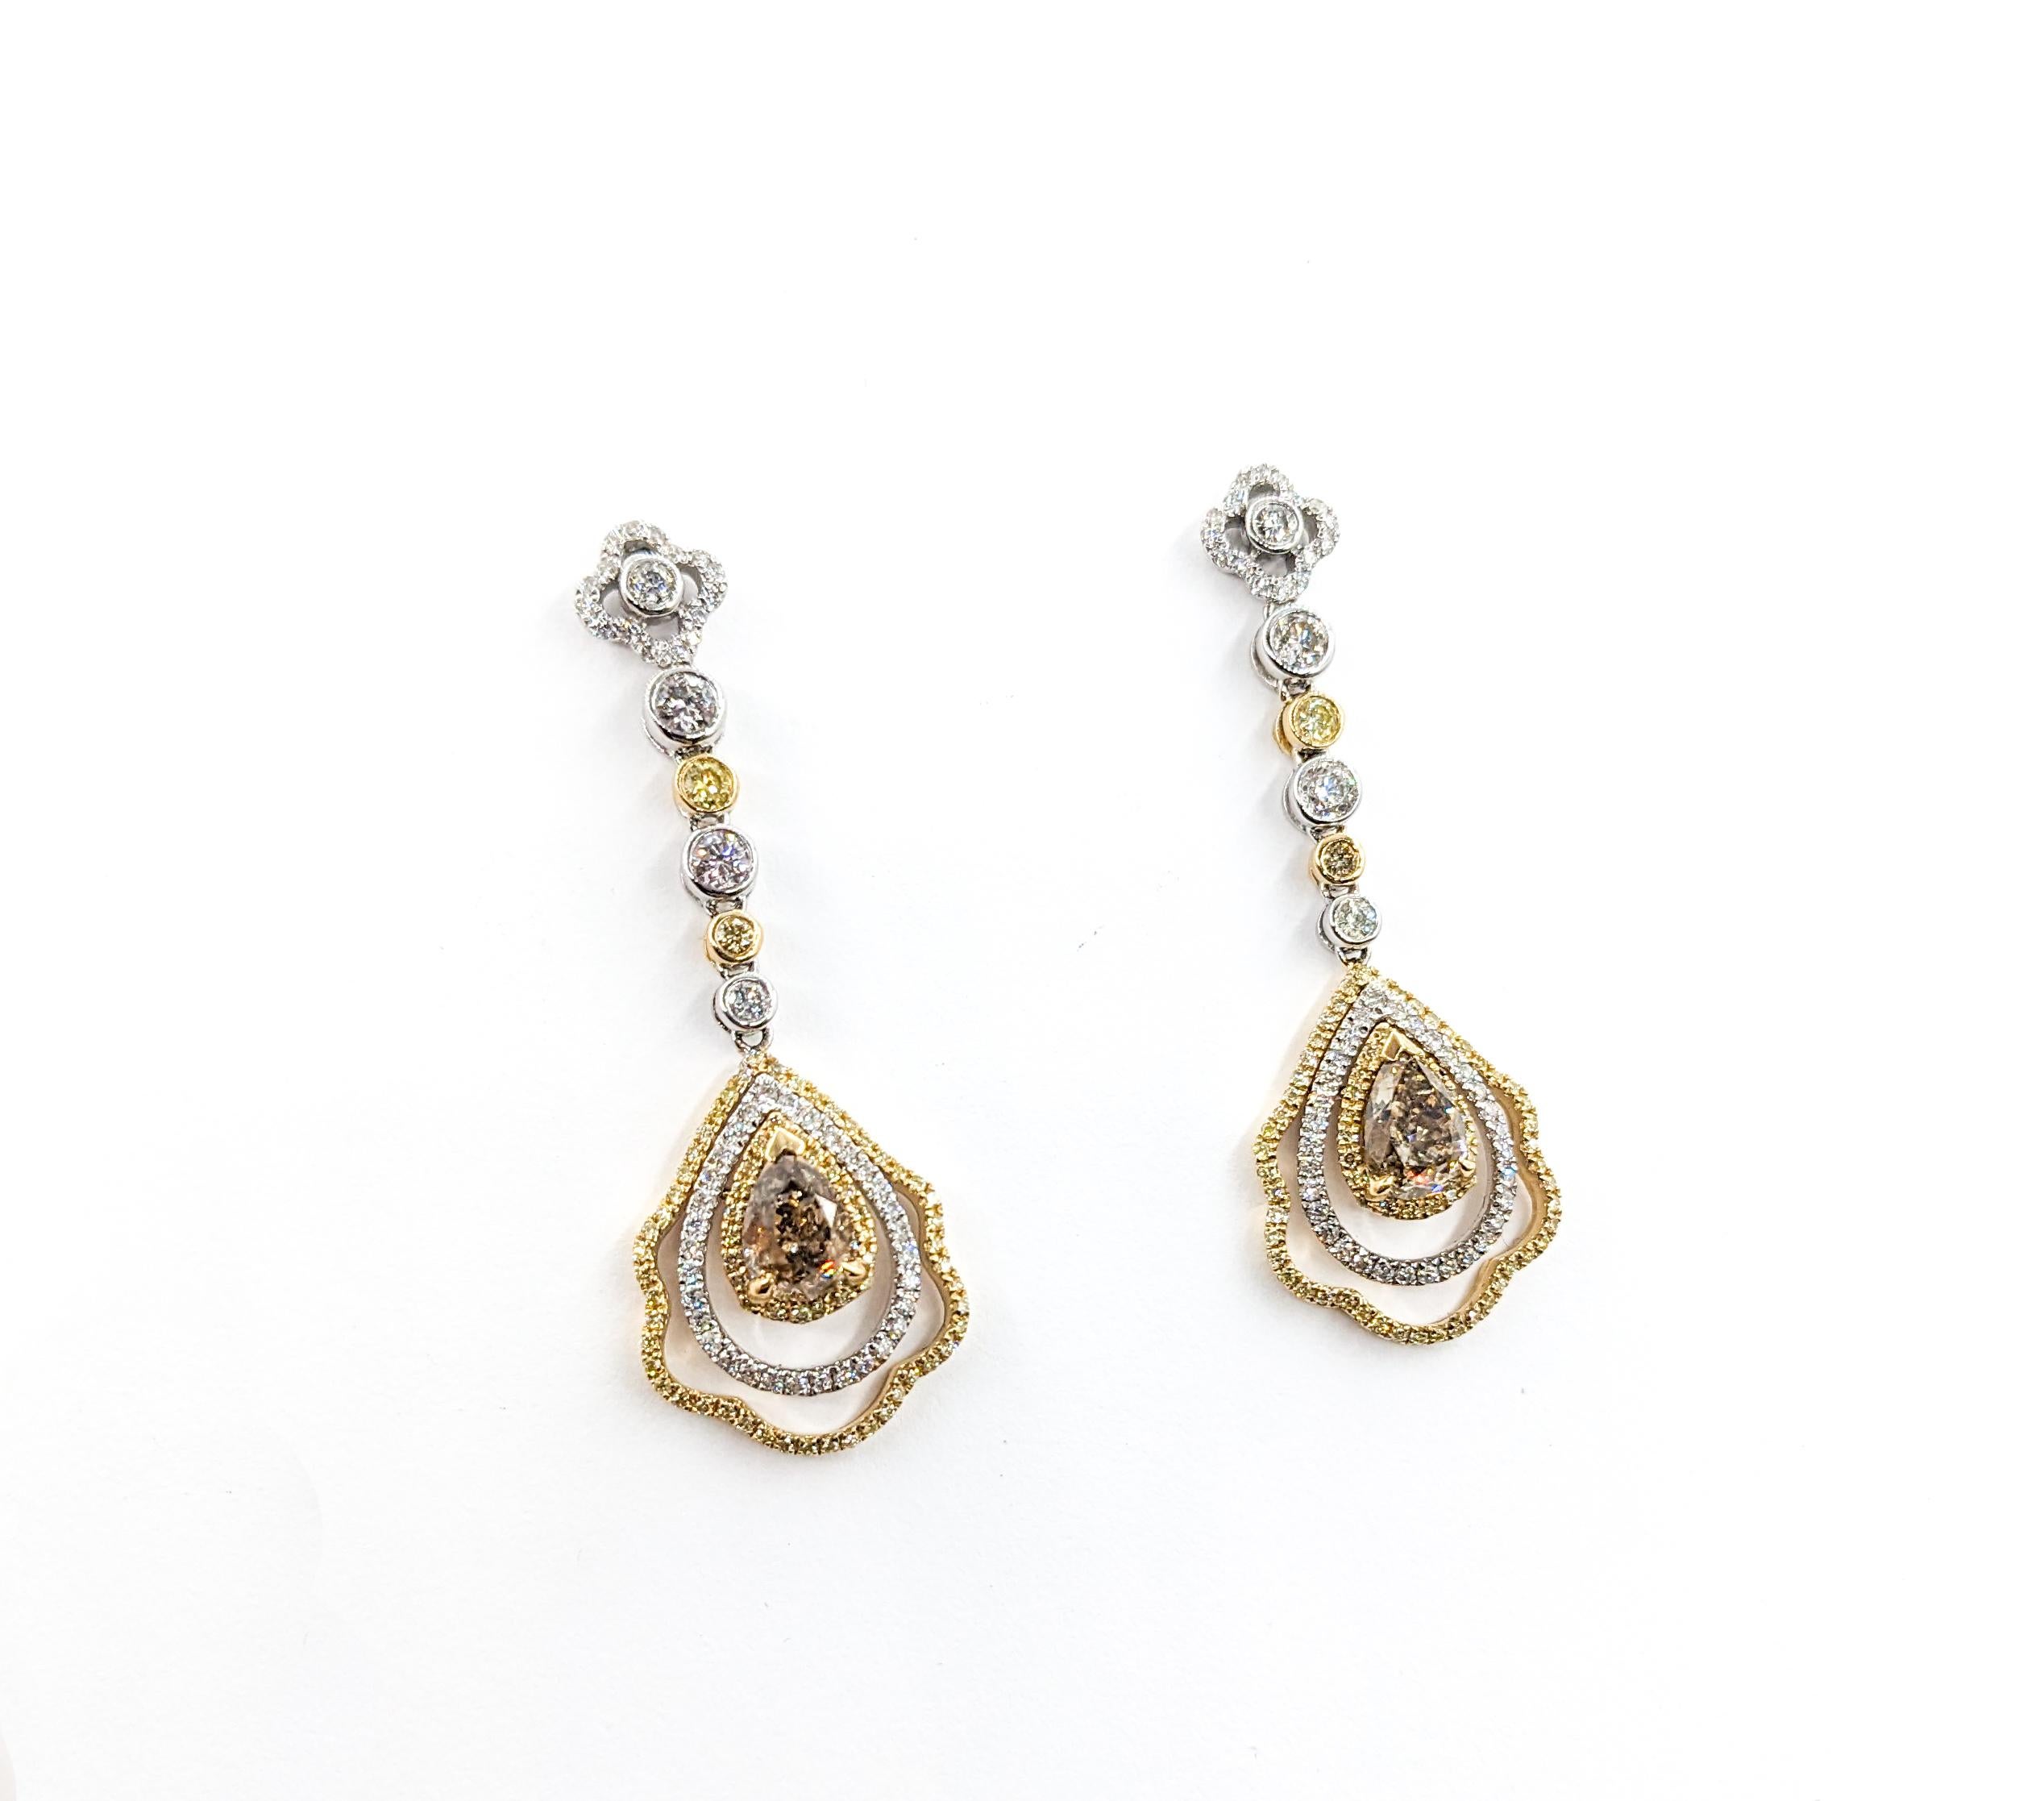 3.64ctw Diamonds Dangle Earrings In Two-Tone Gold


Introducing an exquisite pair of Women's Diamond Fashion Earrings Dangle, elegantly crafted in 14kt two-tone gold. These stunning earrings feature a dazzling array of 3.64ctw diamonds, showcasing a